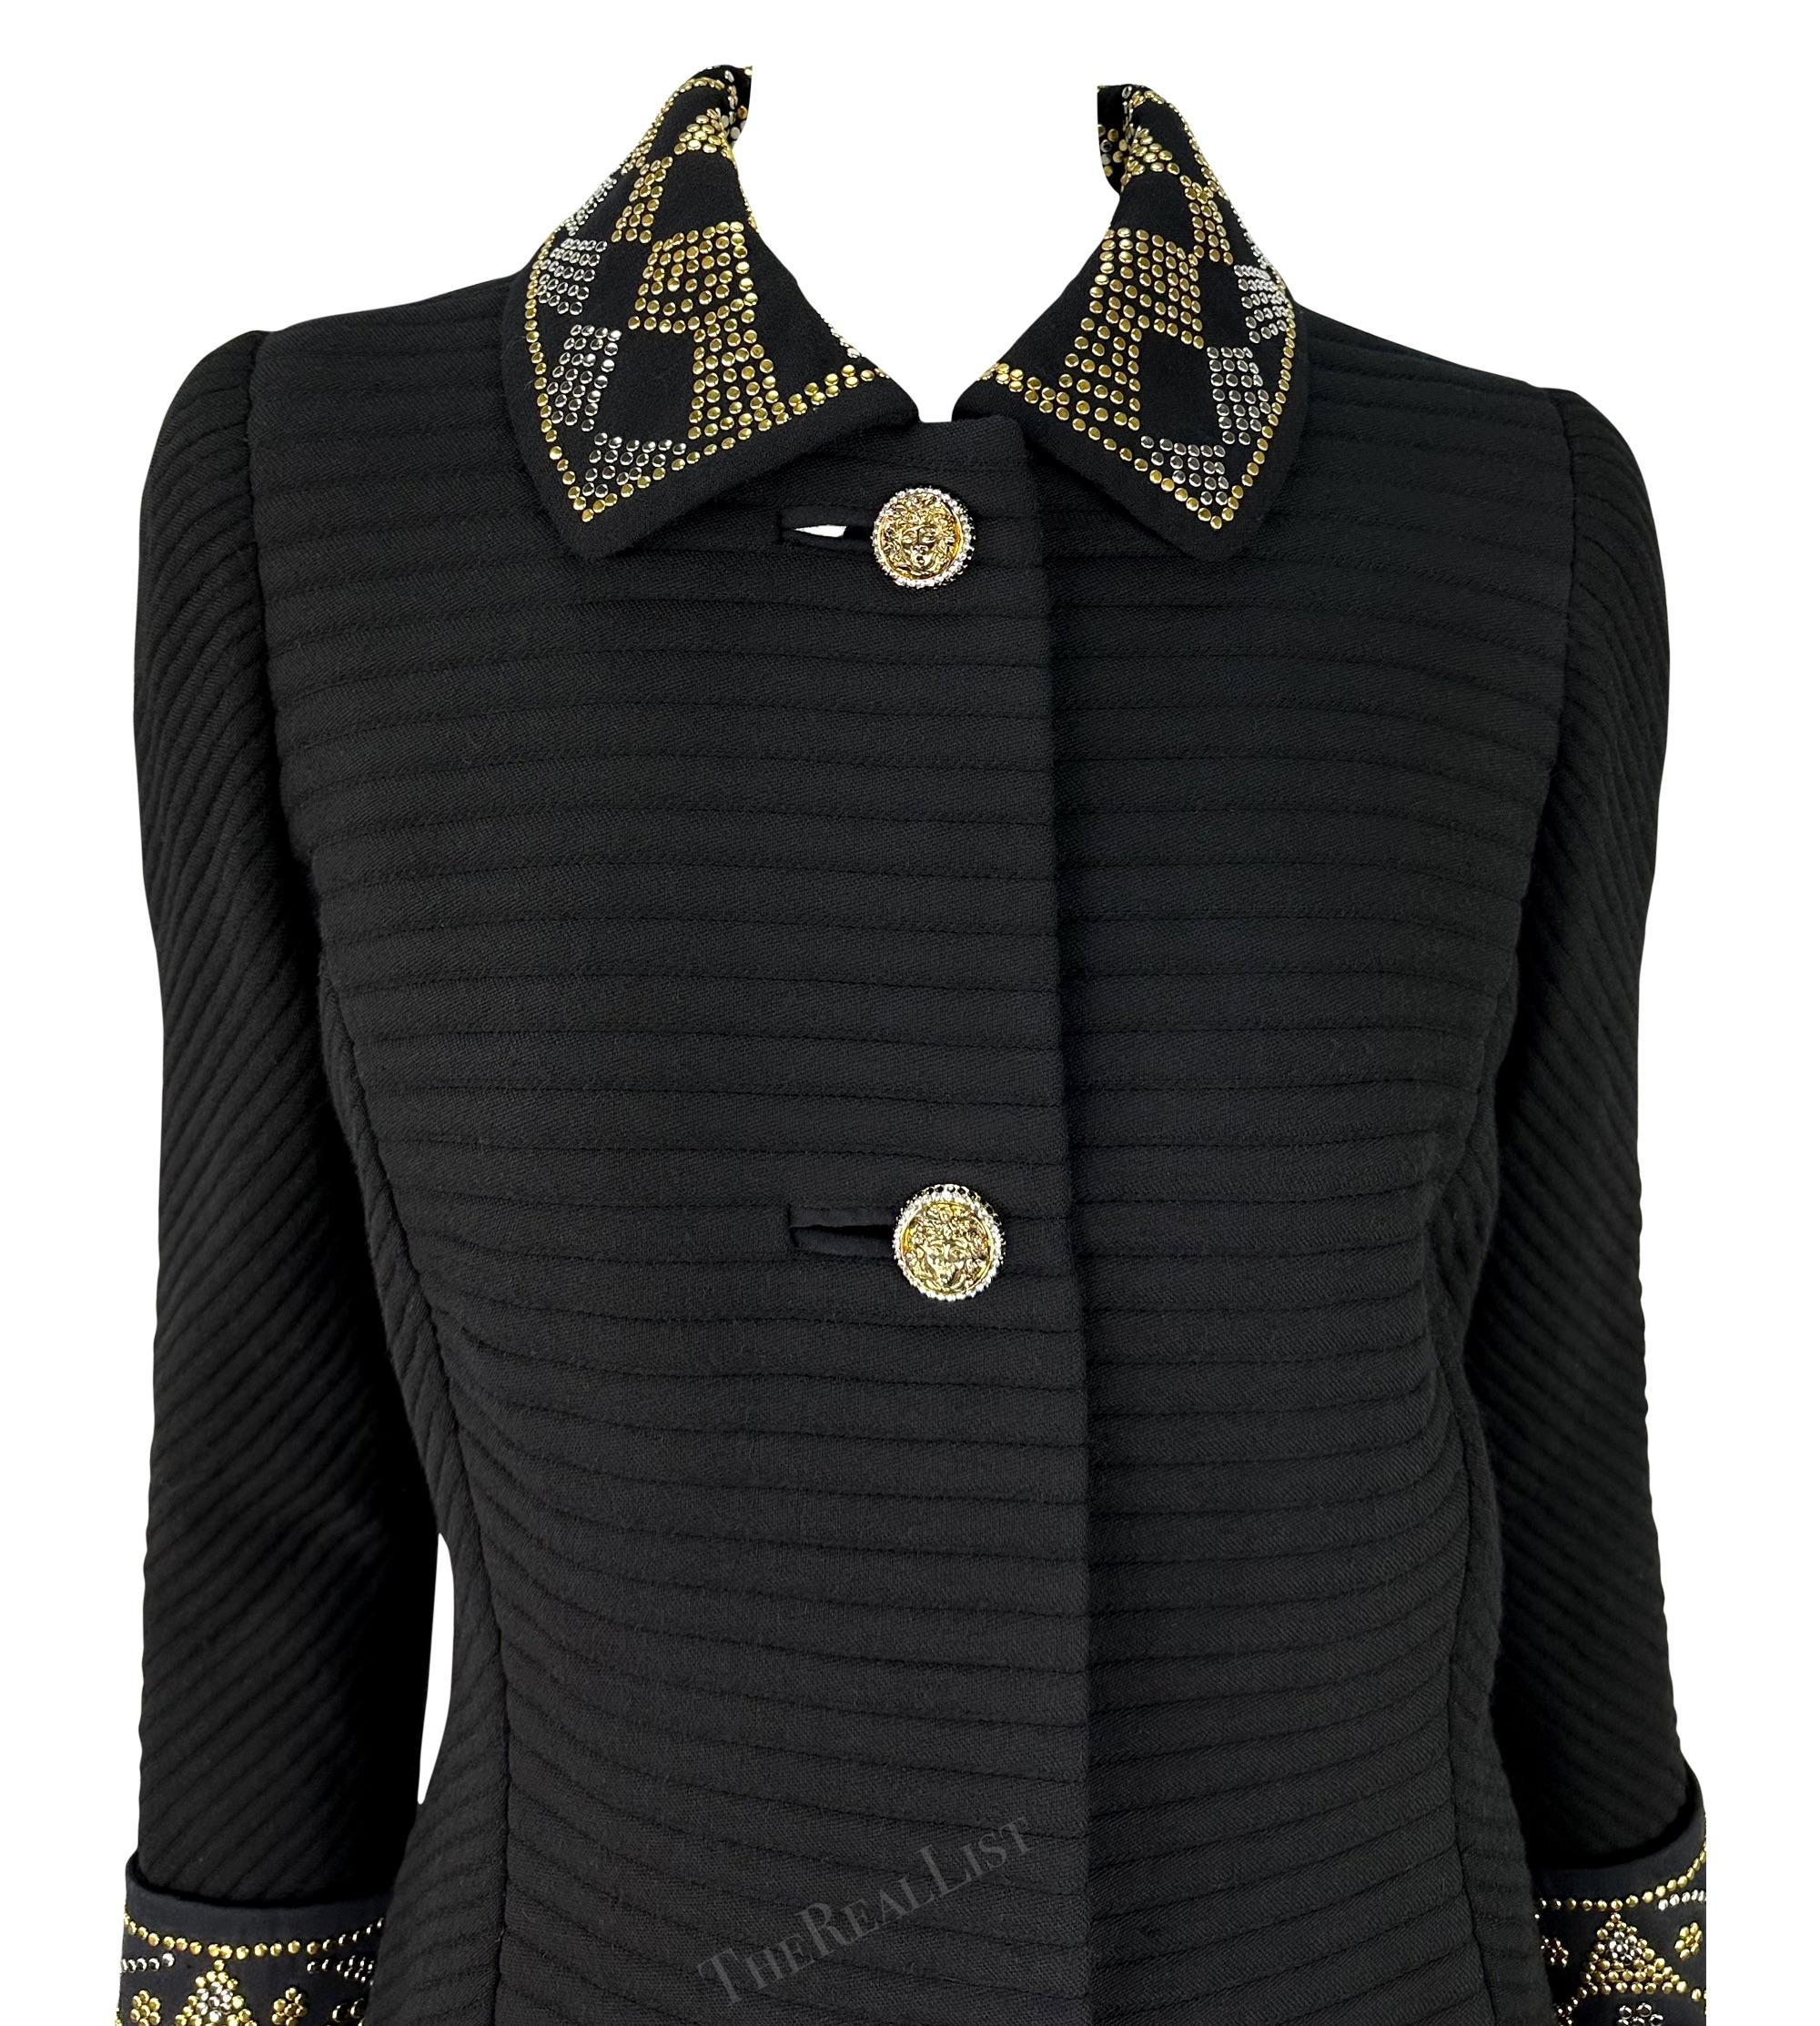 F/W 1991 Atelier Versace Haute Couture Runway Studded Black Wool Blazer Jacket In Excellent Condition For Sale In West Hollywood, CA